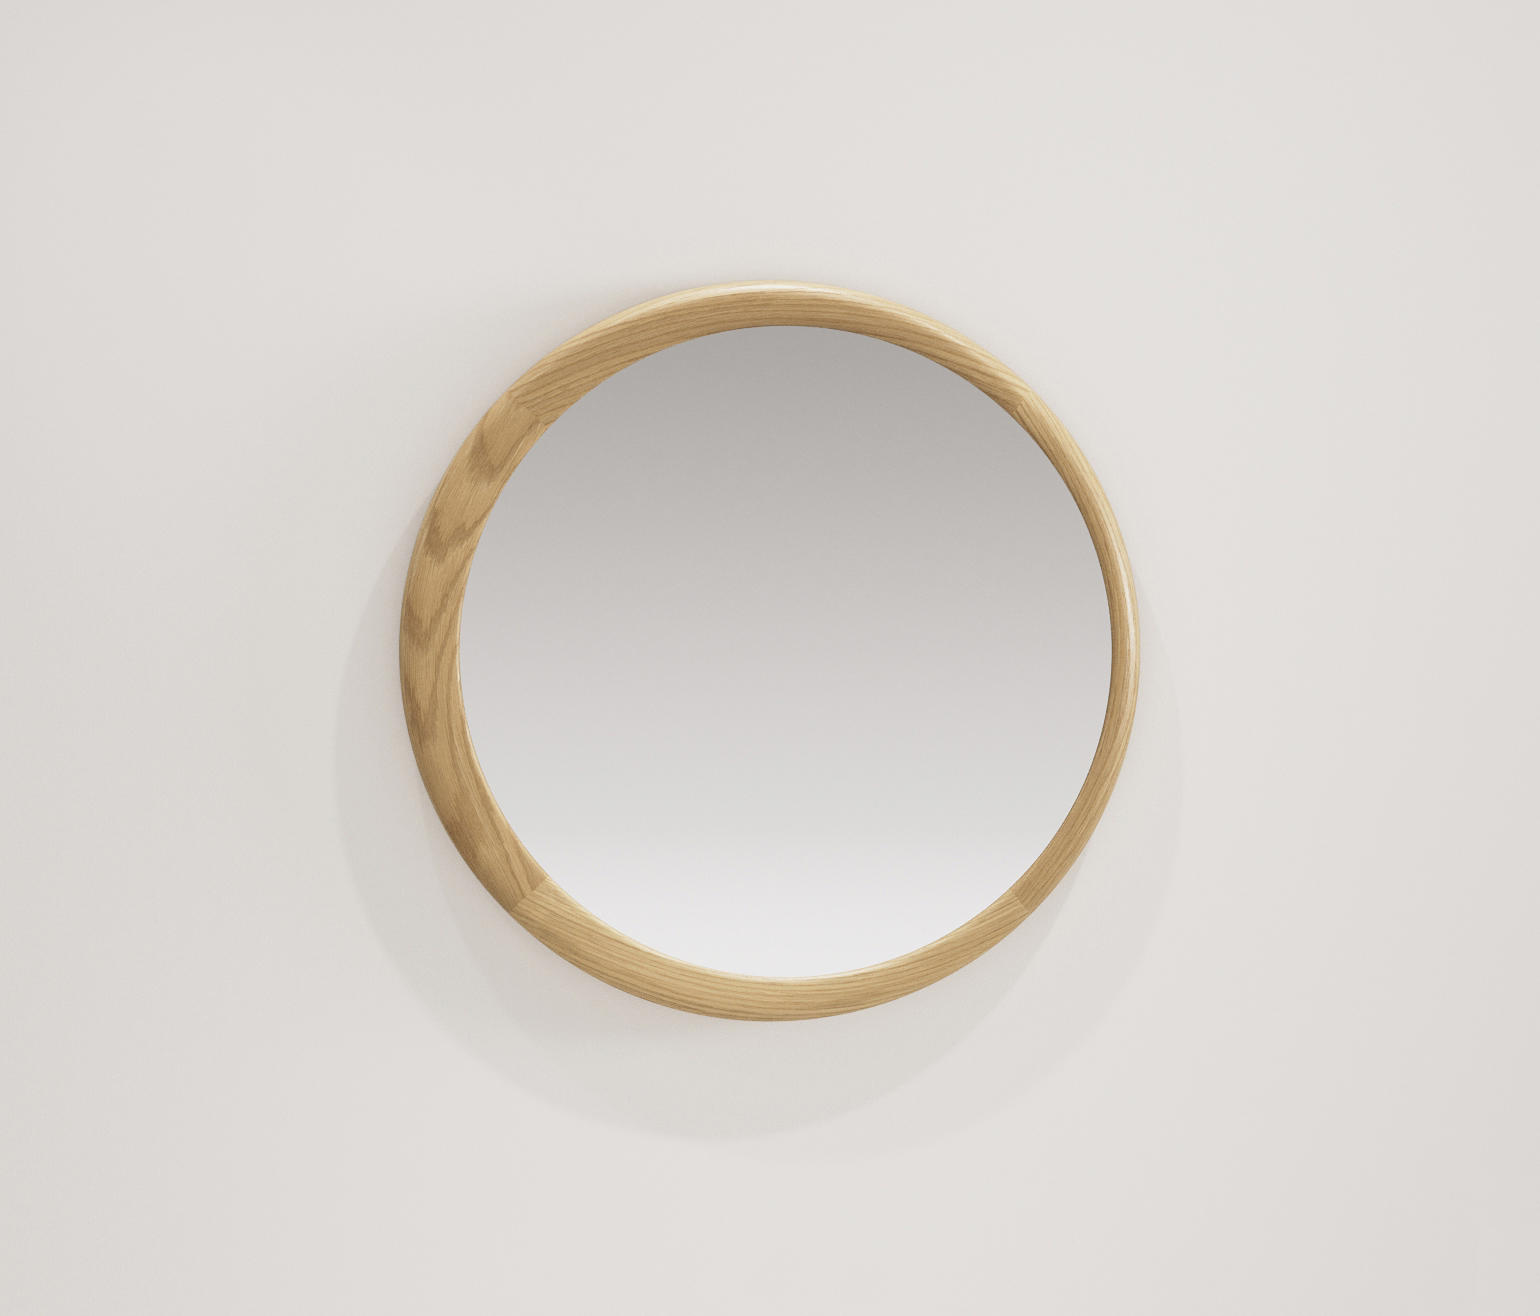 LUNA MIRRORS - Mirrors from Wewood | Architonic